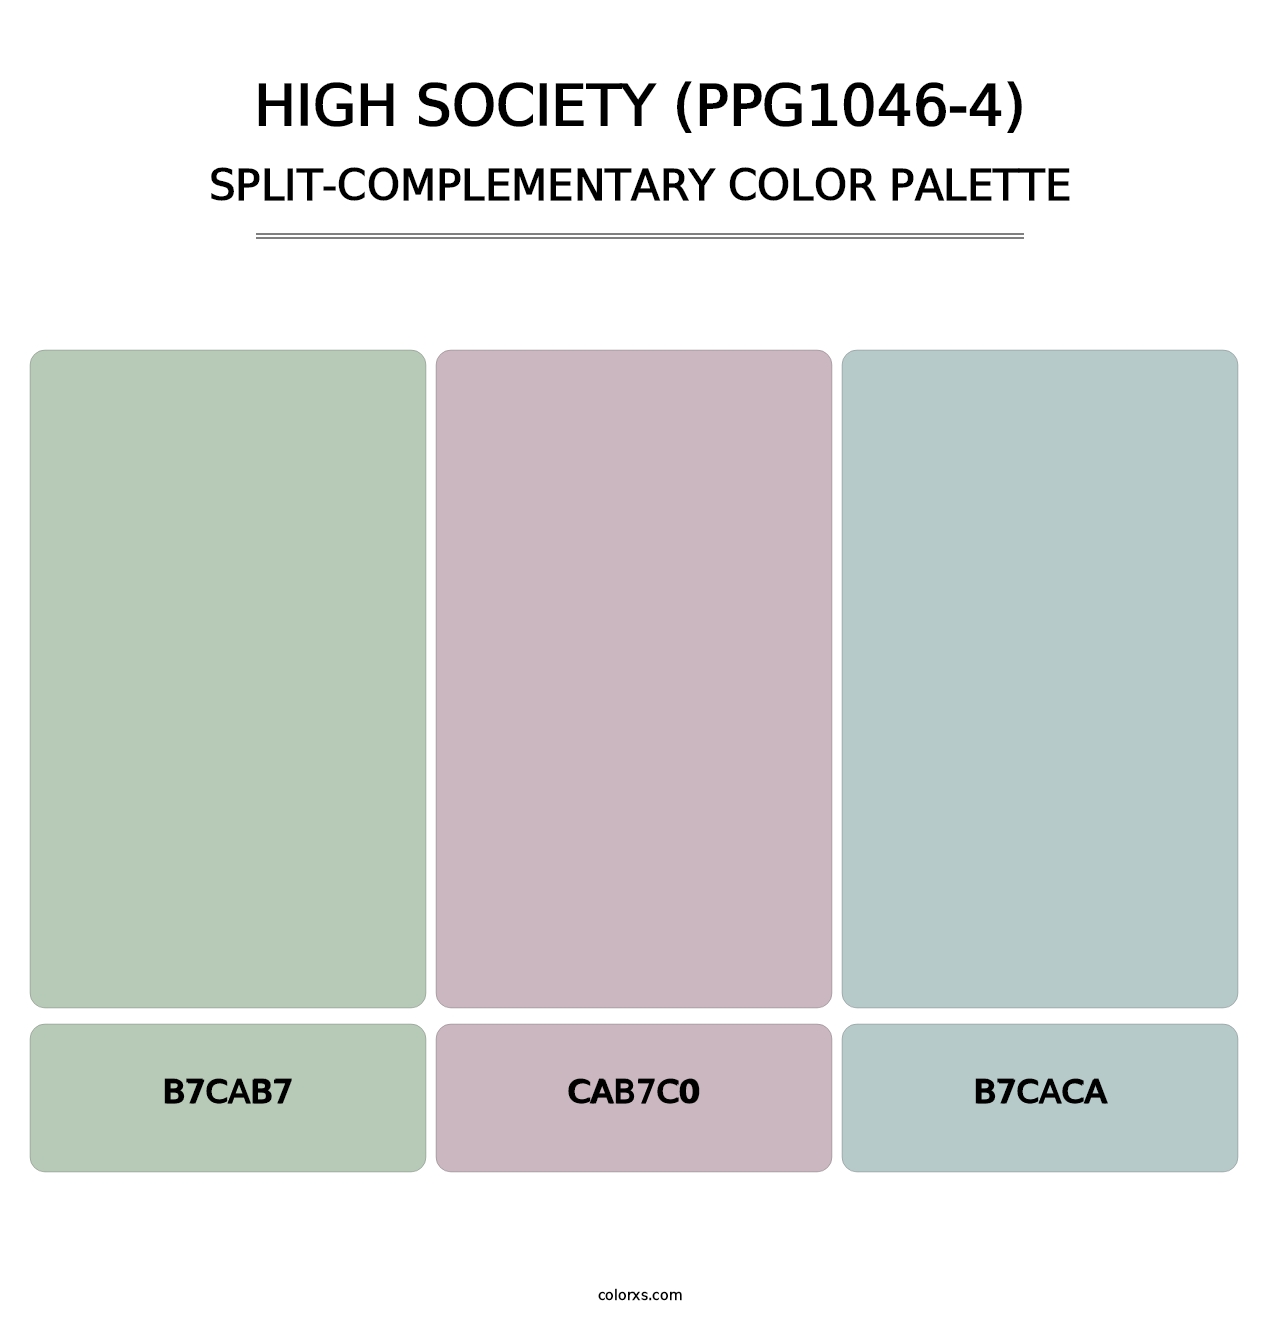 High Society (PPG1046-4) - Split-Complementary Color Palette